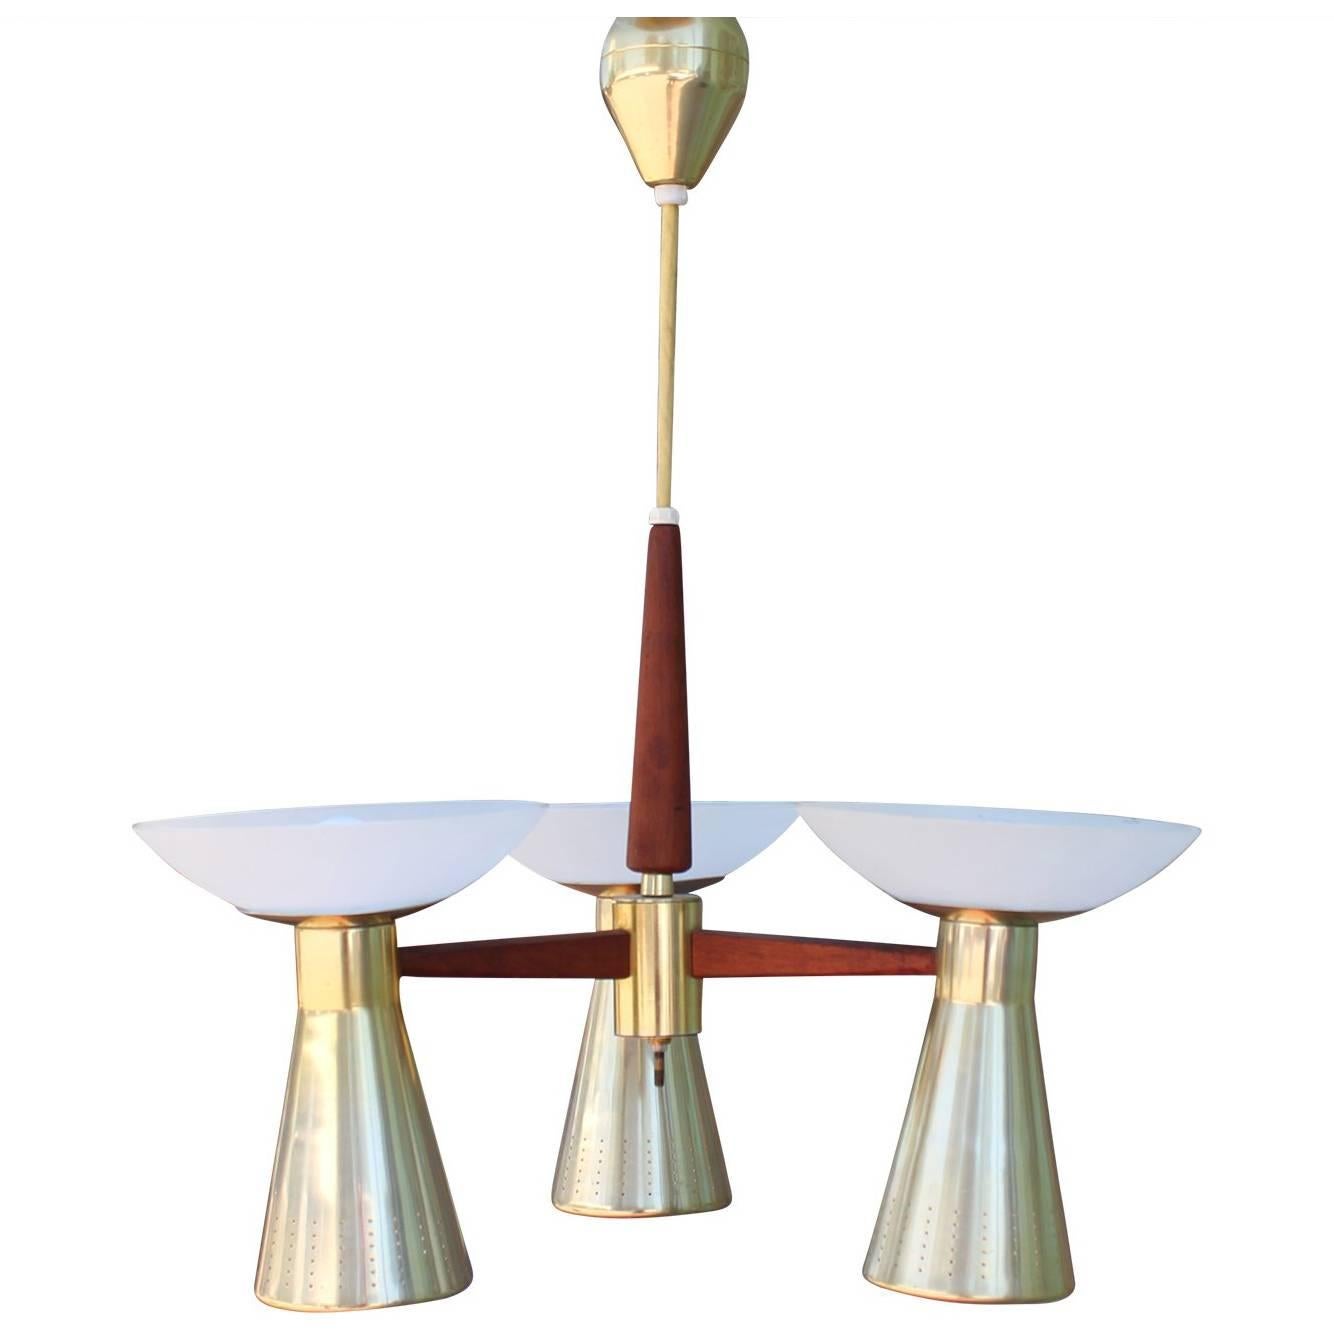 Modernist Perforated Brass and Walnut Chandelier with Three Double Sconces